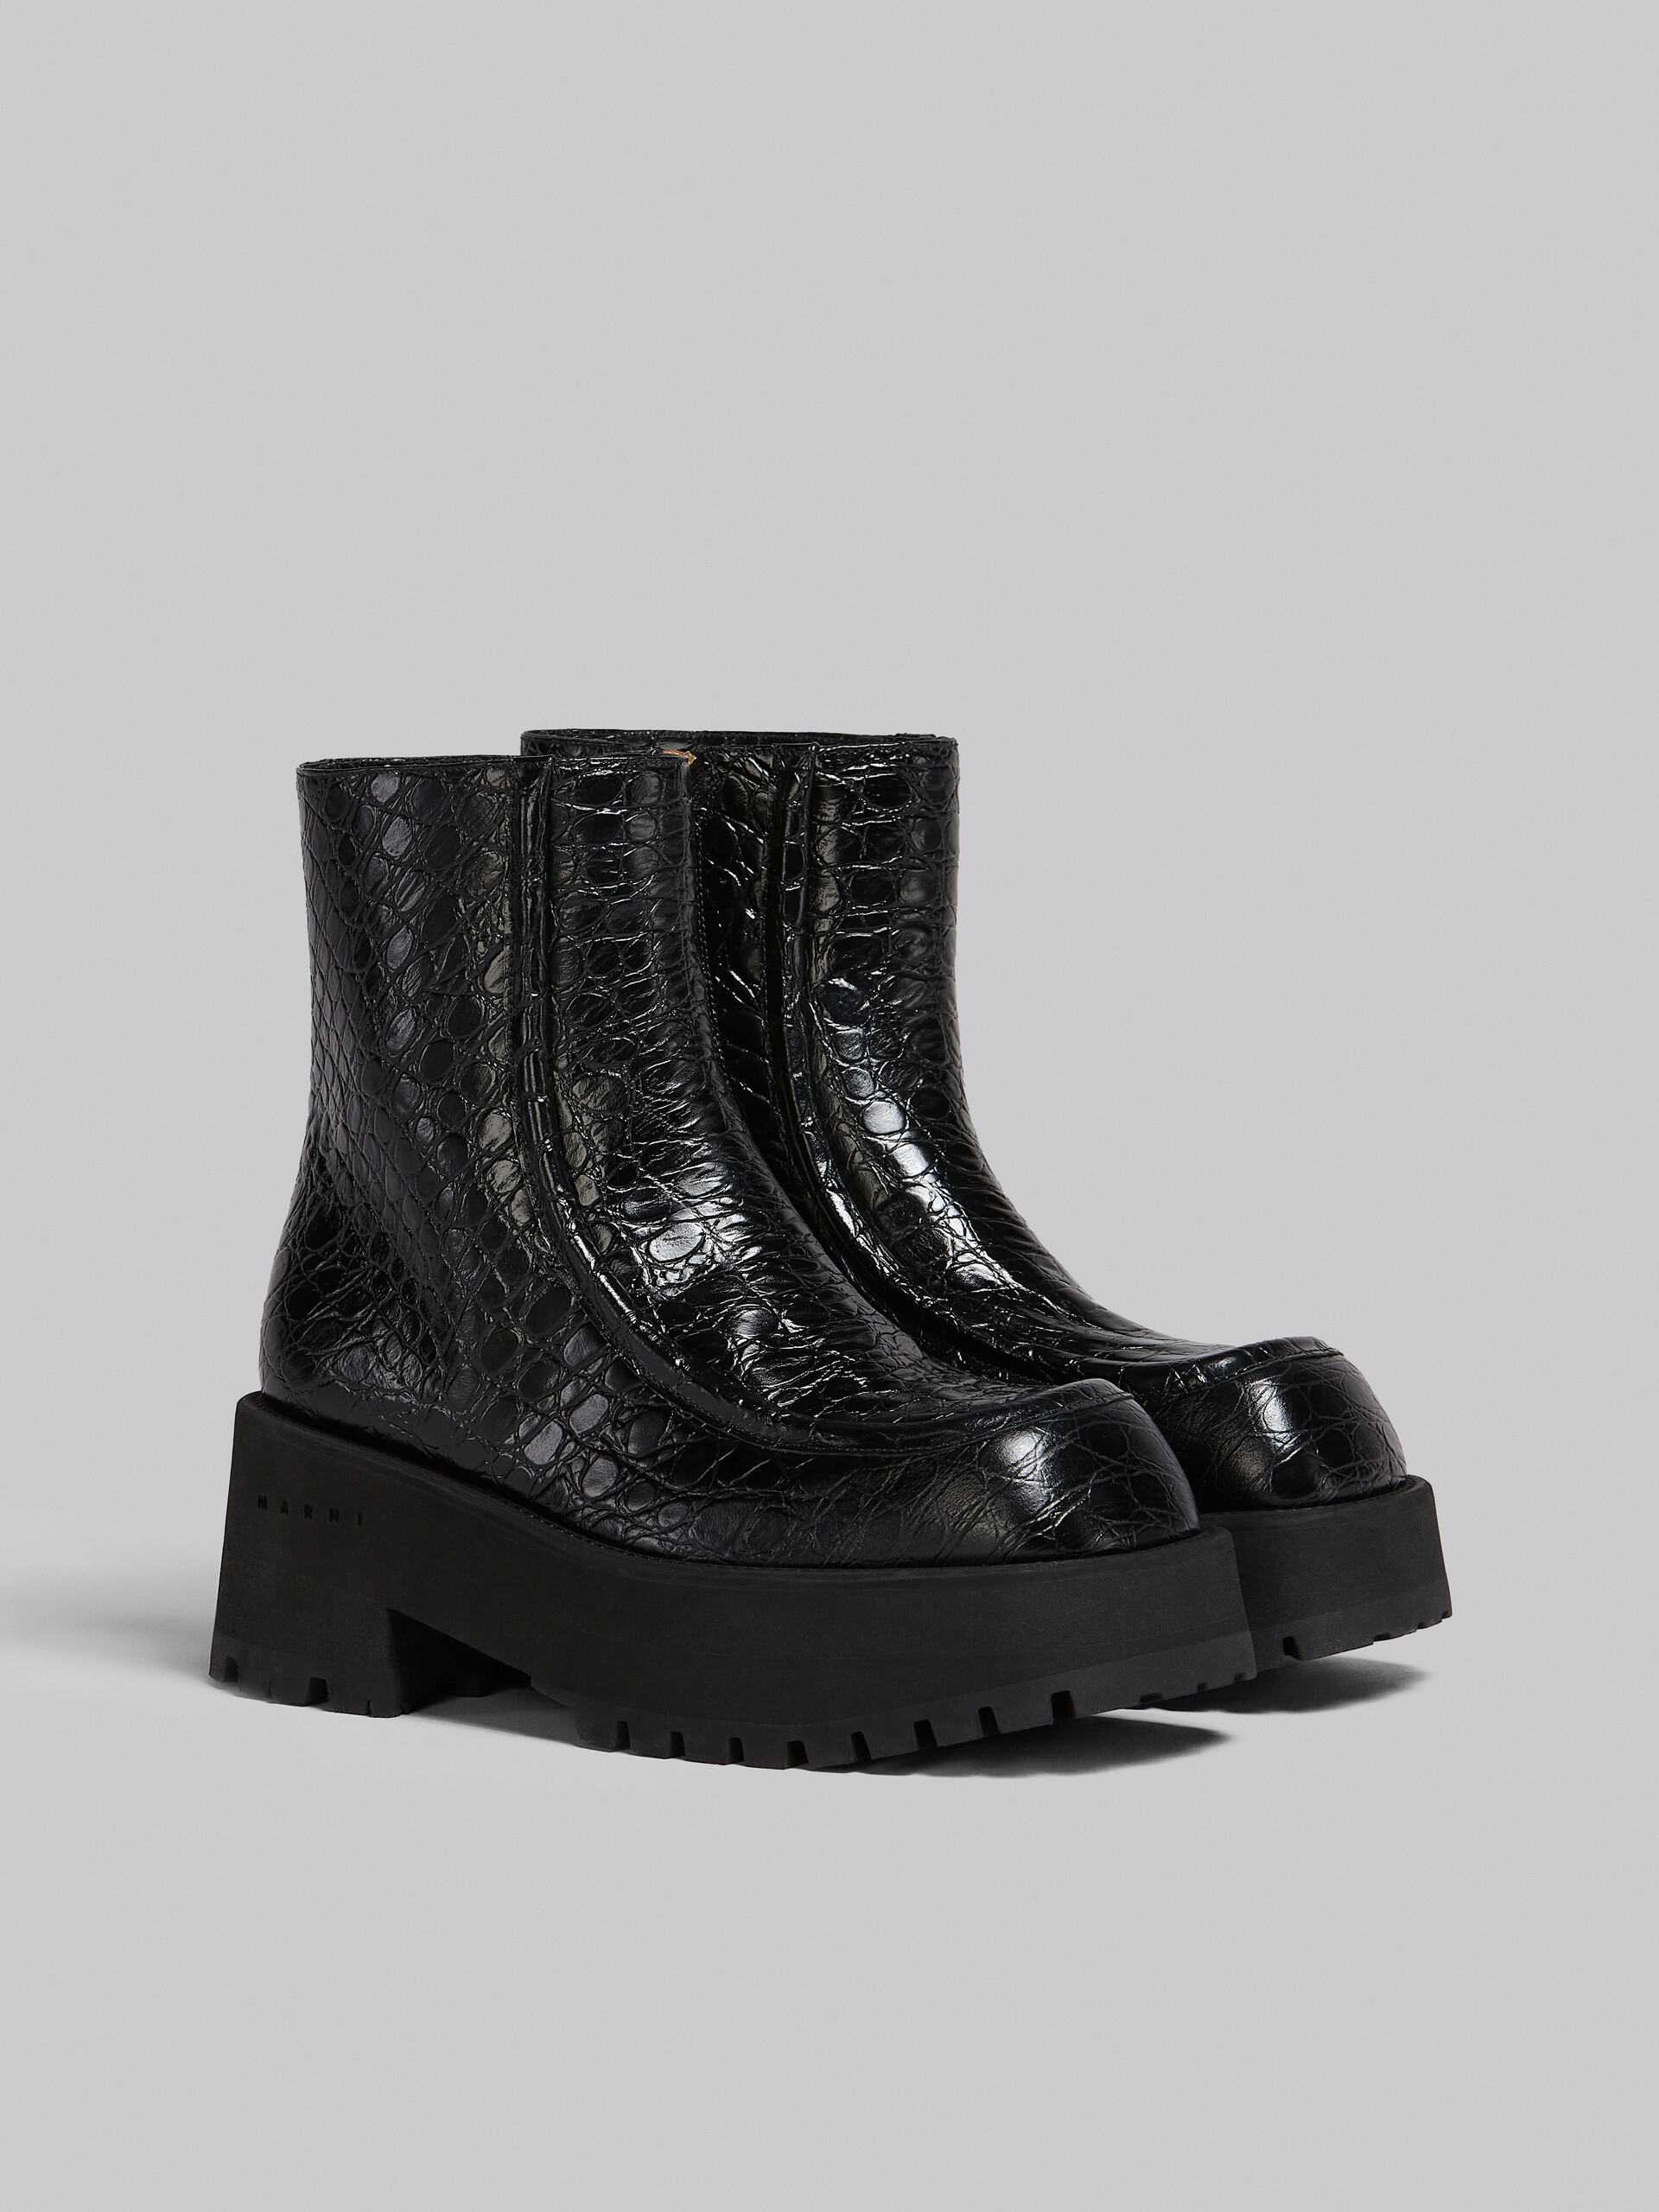 Ankle boot in black croco print leather - Boots - Image 2